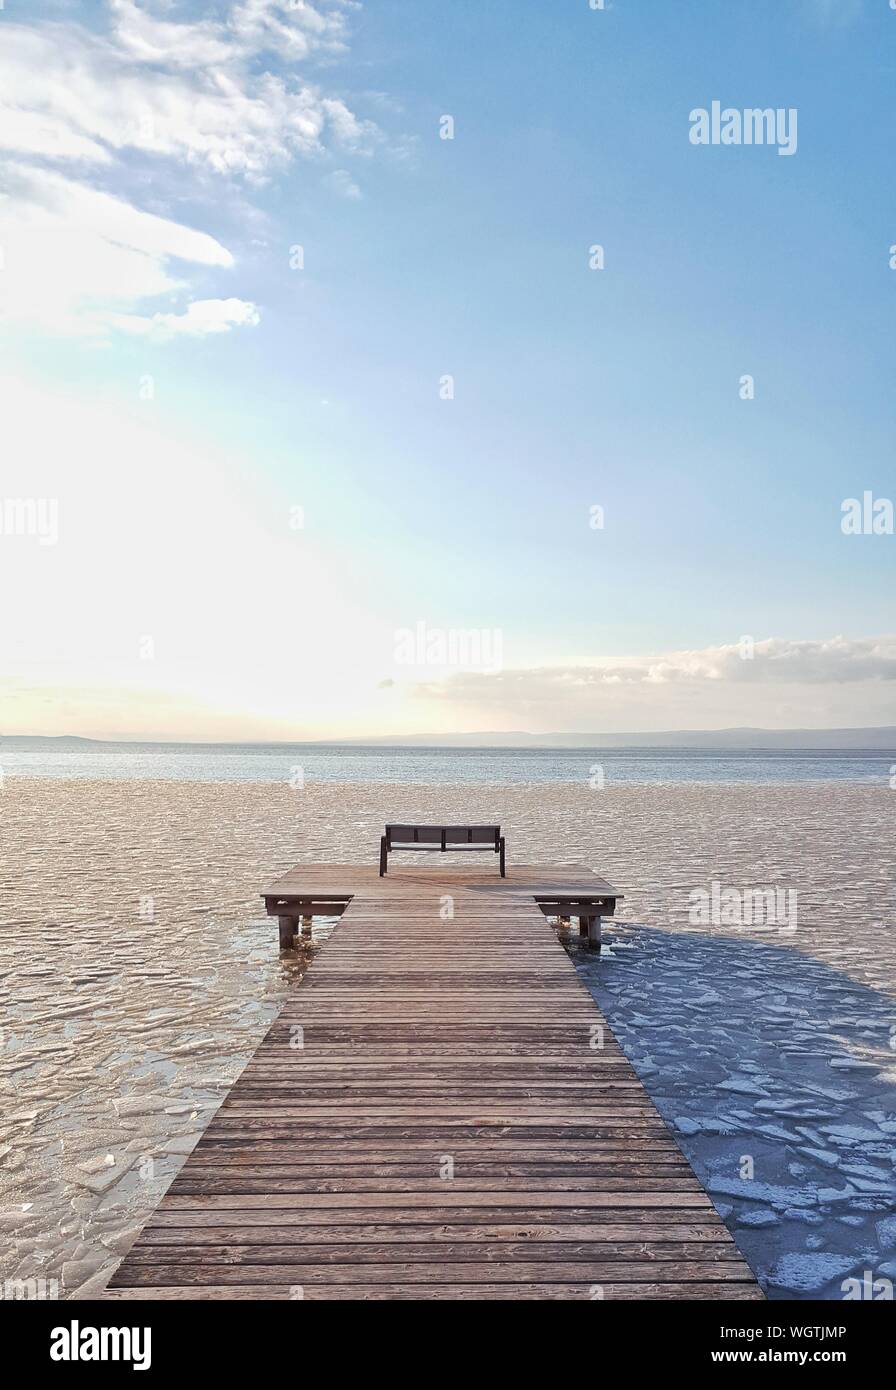 Pier At Beach Against Sky On Sunny Day During Winter Stock Photo